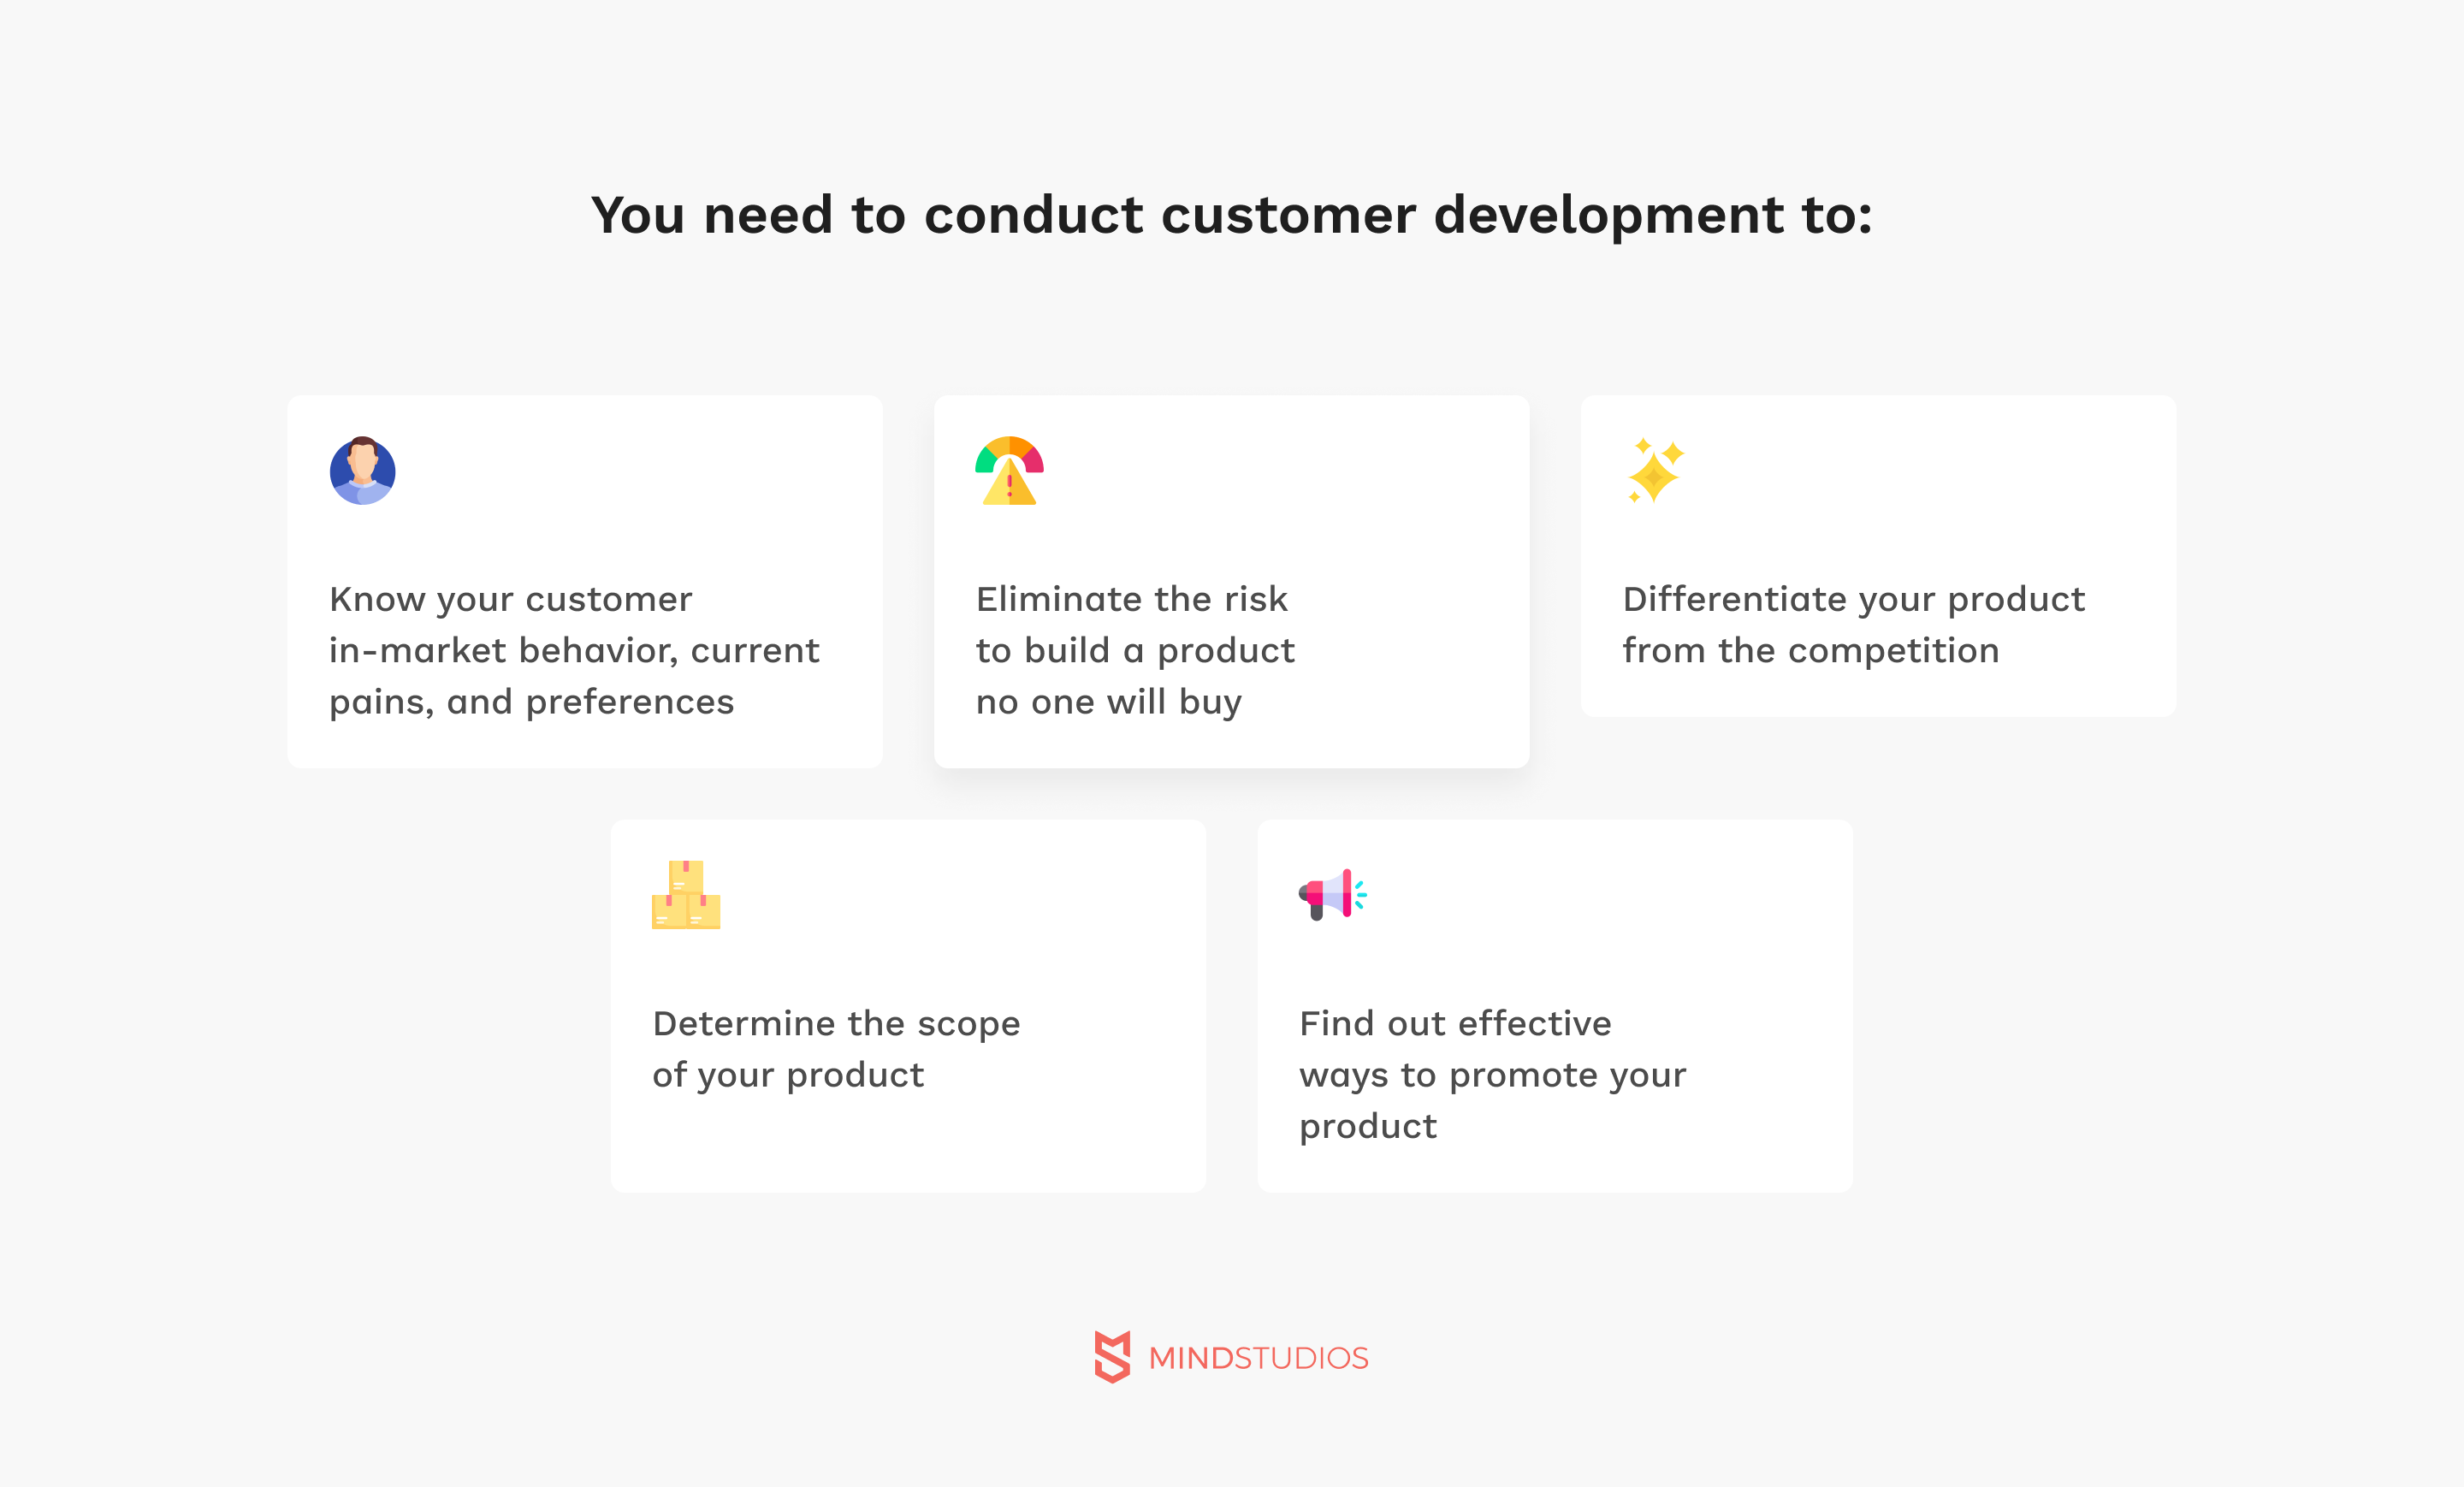 You need to conduct customer development to